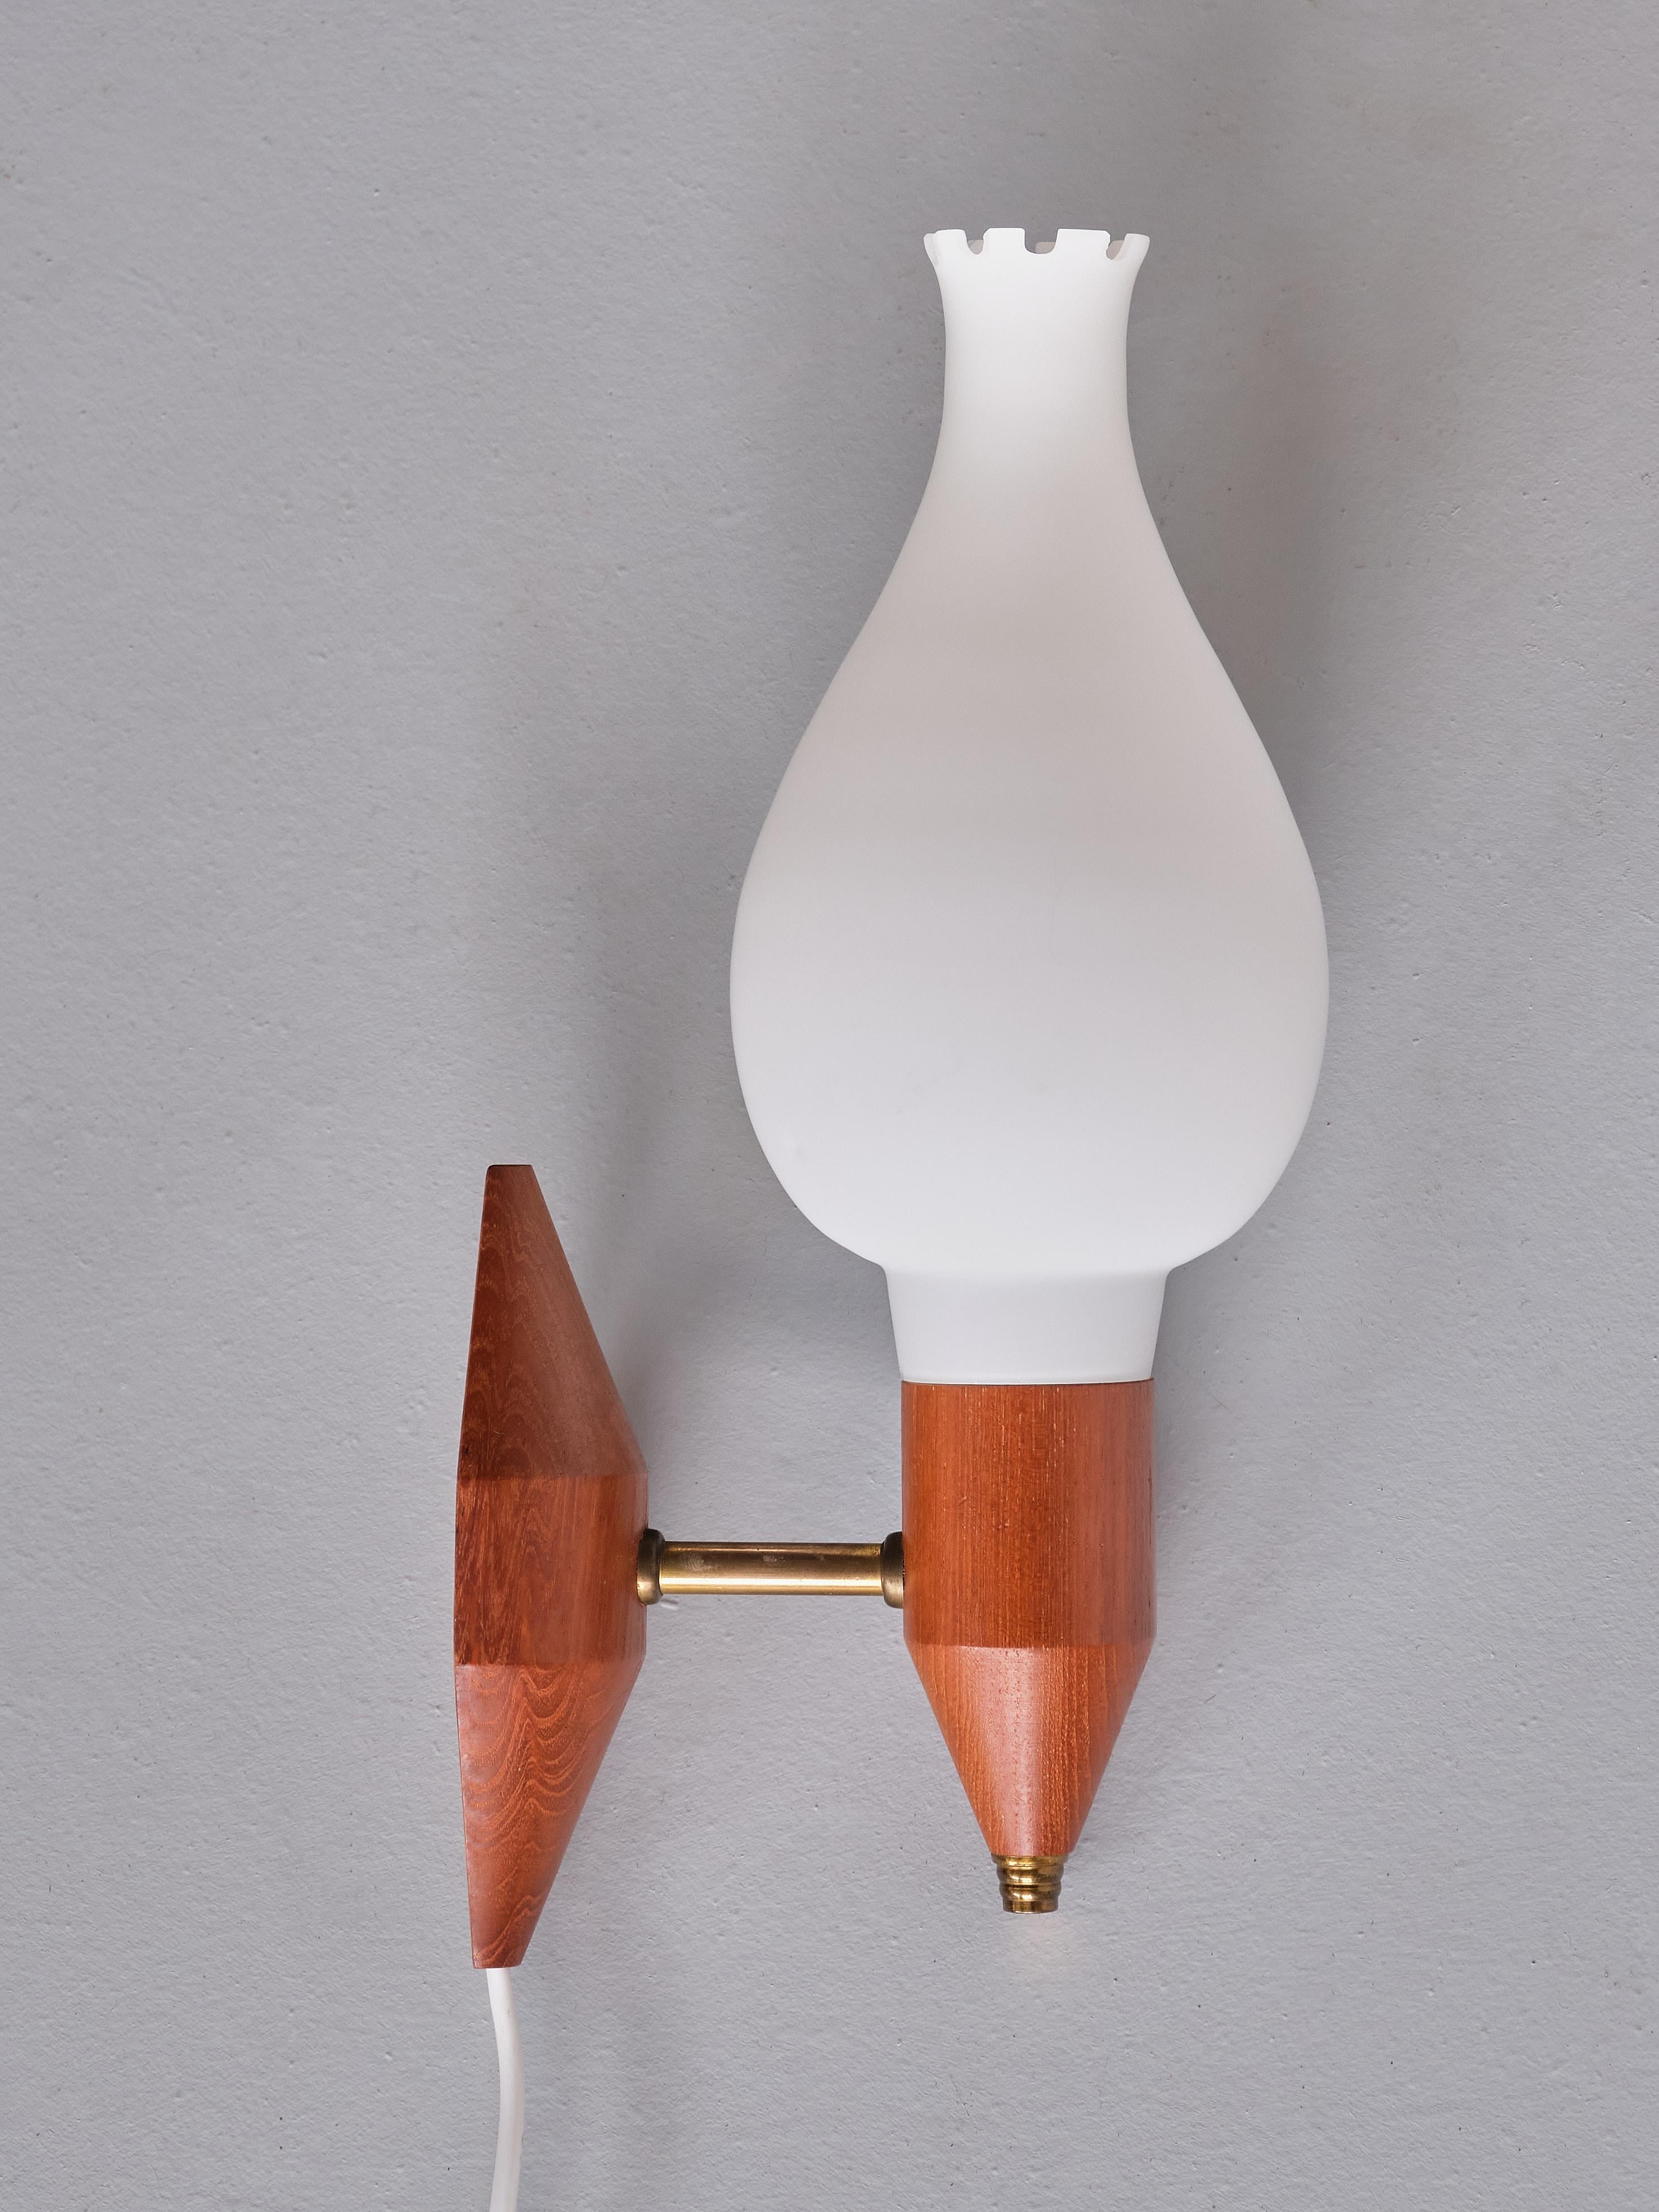 Swedish Modern Wall Lamps in Teak Wood, Brass and Opaline Glass, Sweden, 1950s For Sale 3